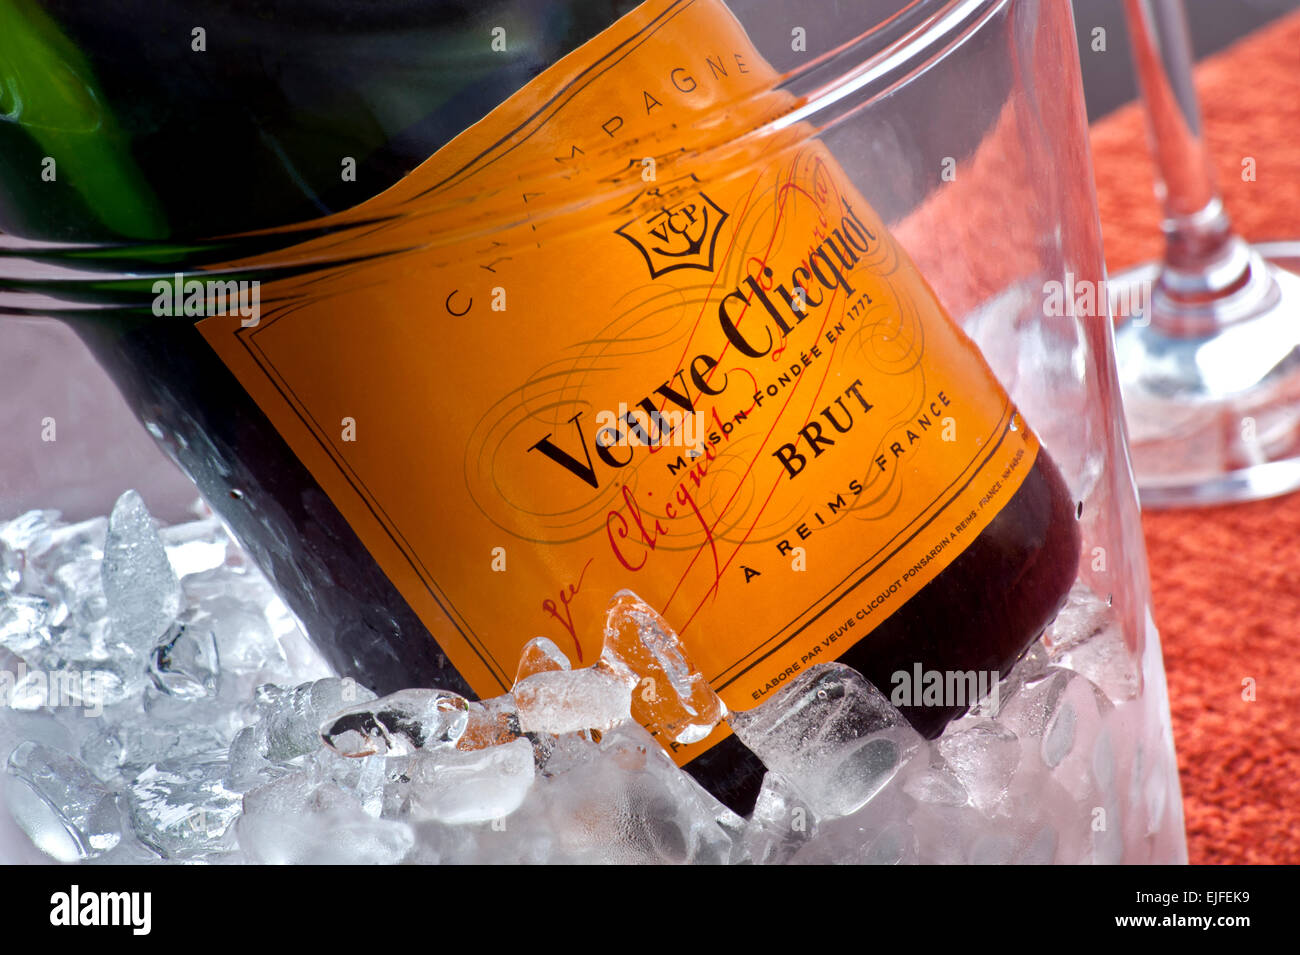 Close view on Veuve Clicquot fine Champagne bottle on ice in wine cooler Stock Photo